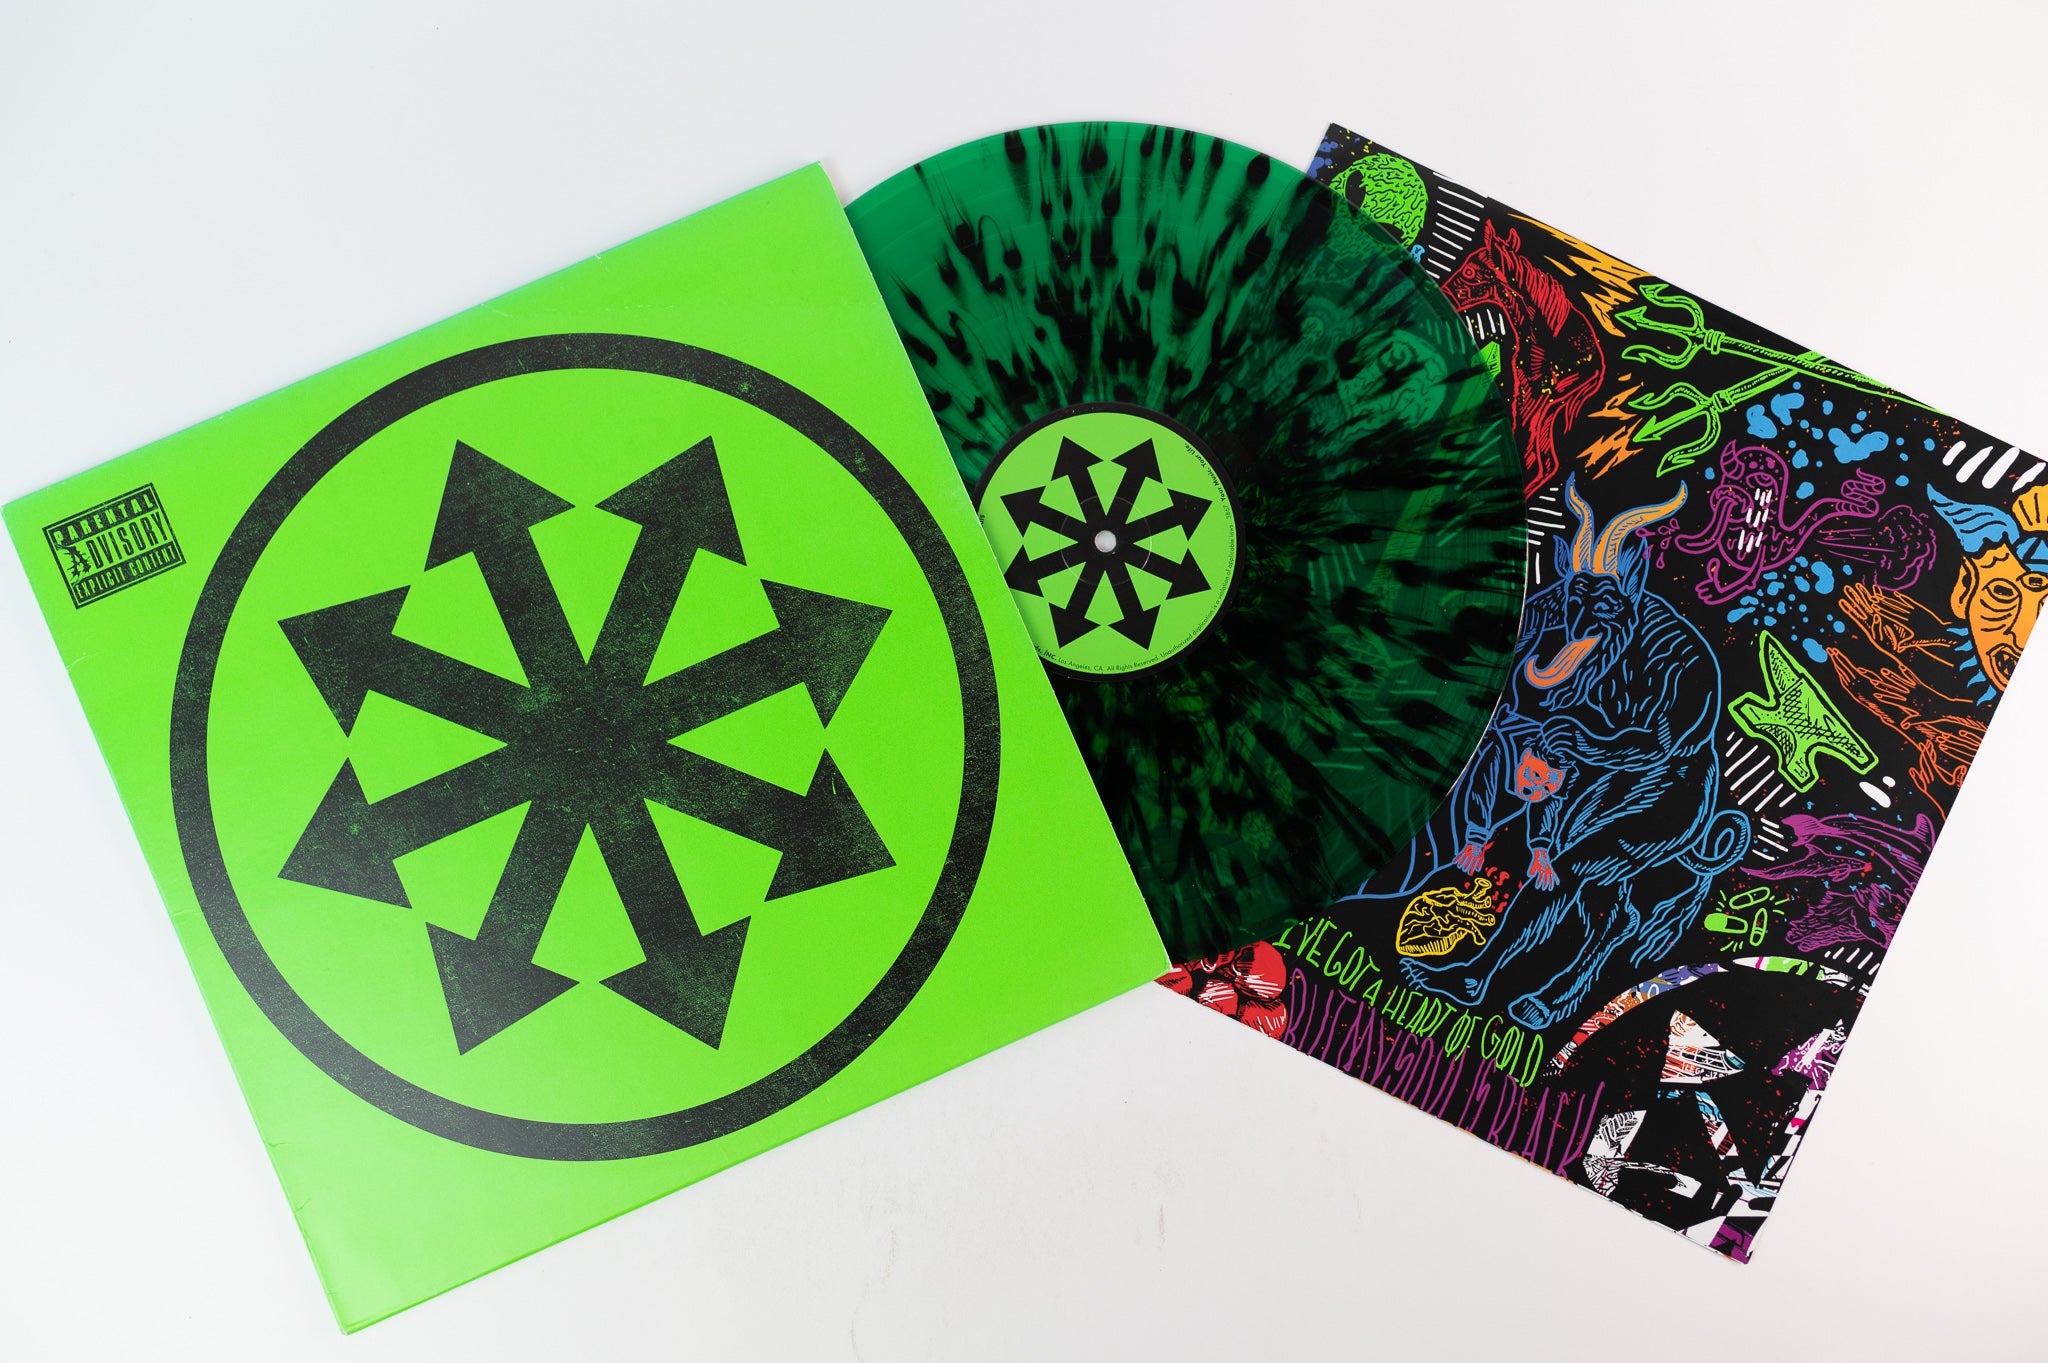 Attila - Chaos on Sharptone Limited Edition Transparent Green with Black Splatter